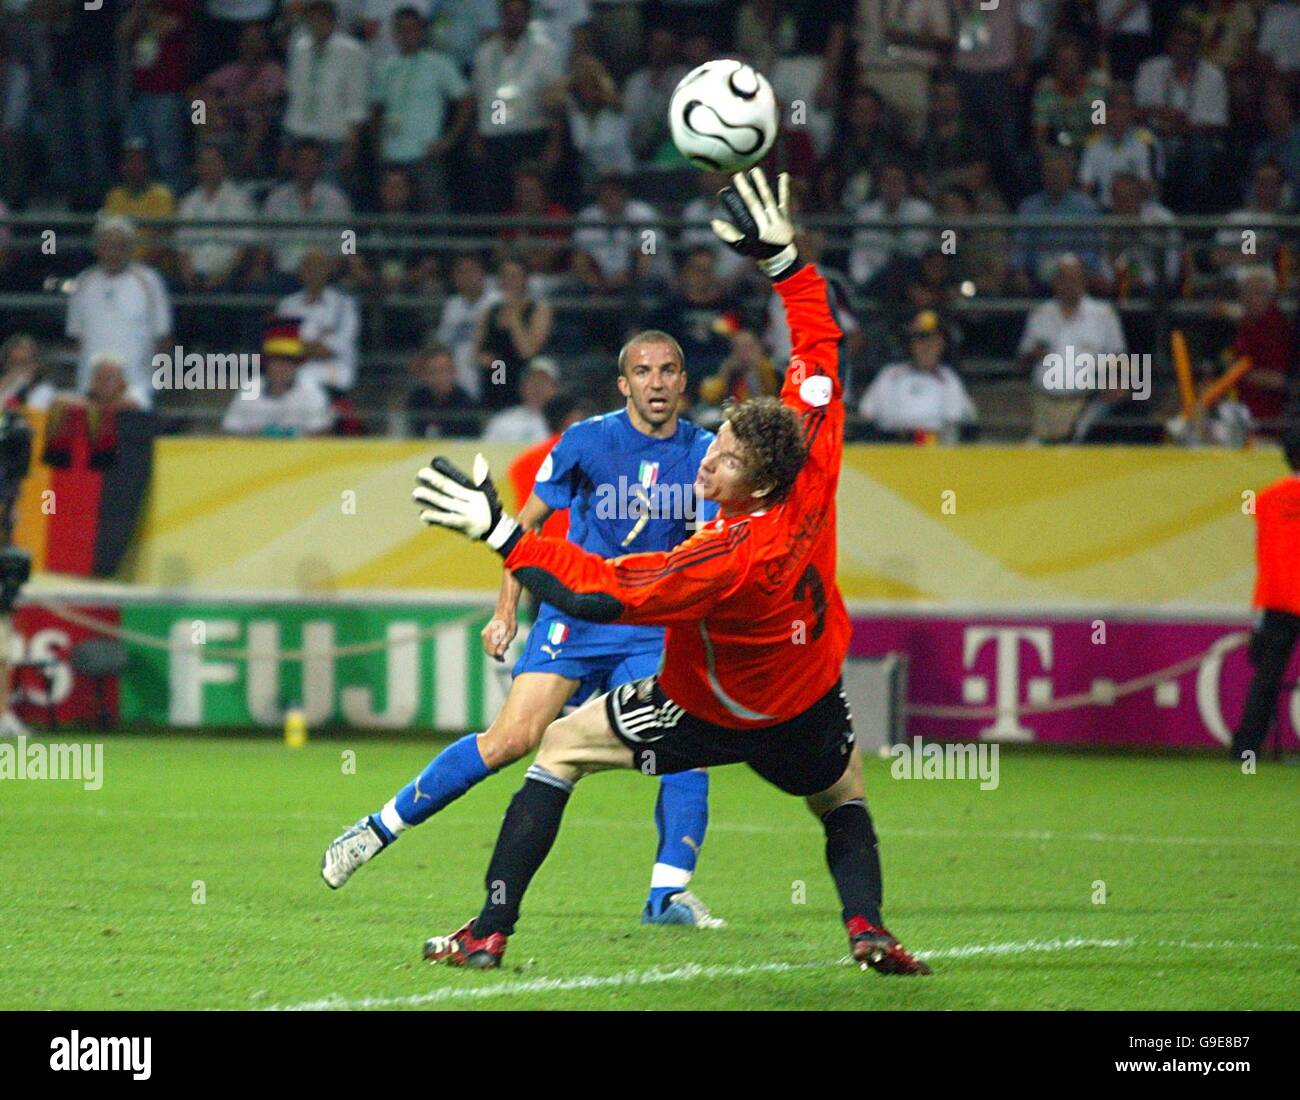 Soccer - 2006 FIFA World Cup Germany - Semi Final - Germany v Italy - Signal Iduna Park. Italy's Alessandro Del Piero scores the second goal of the game past Germany's Jens Lehmann. Stock Photo